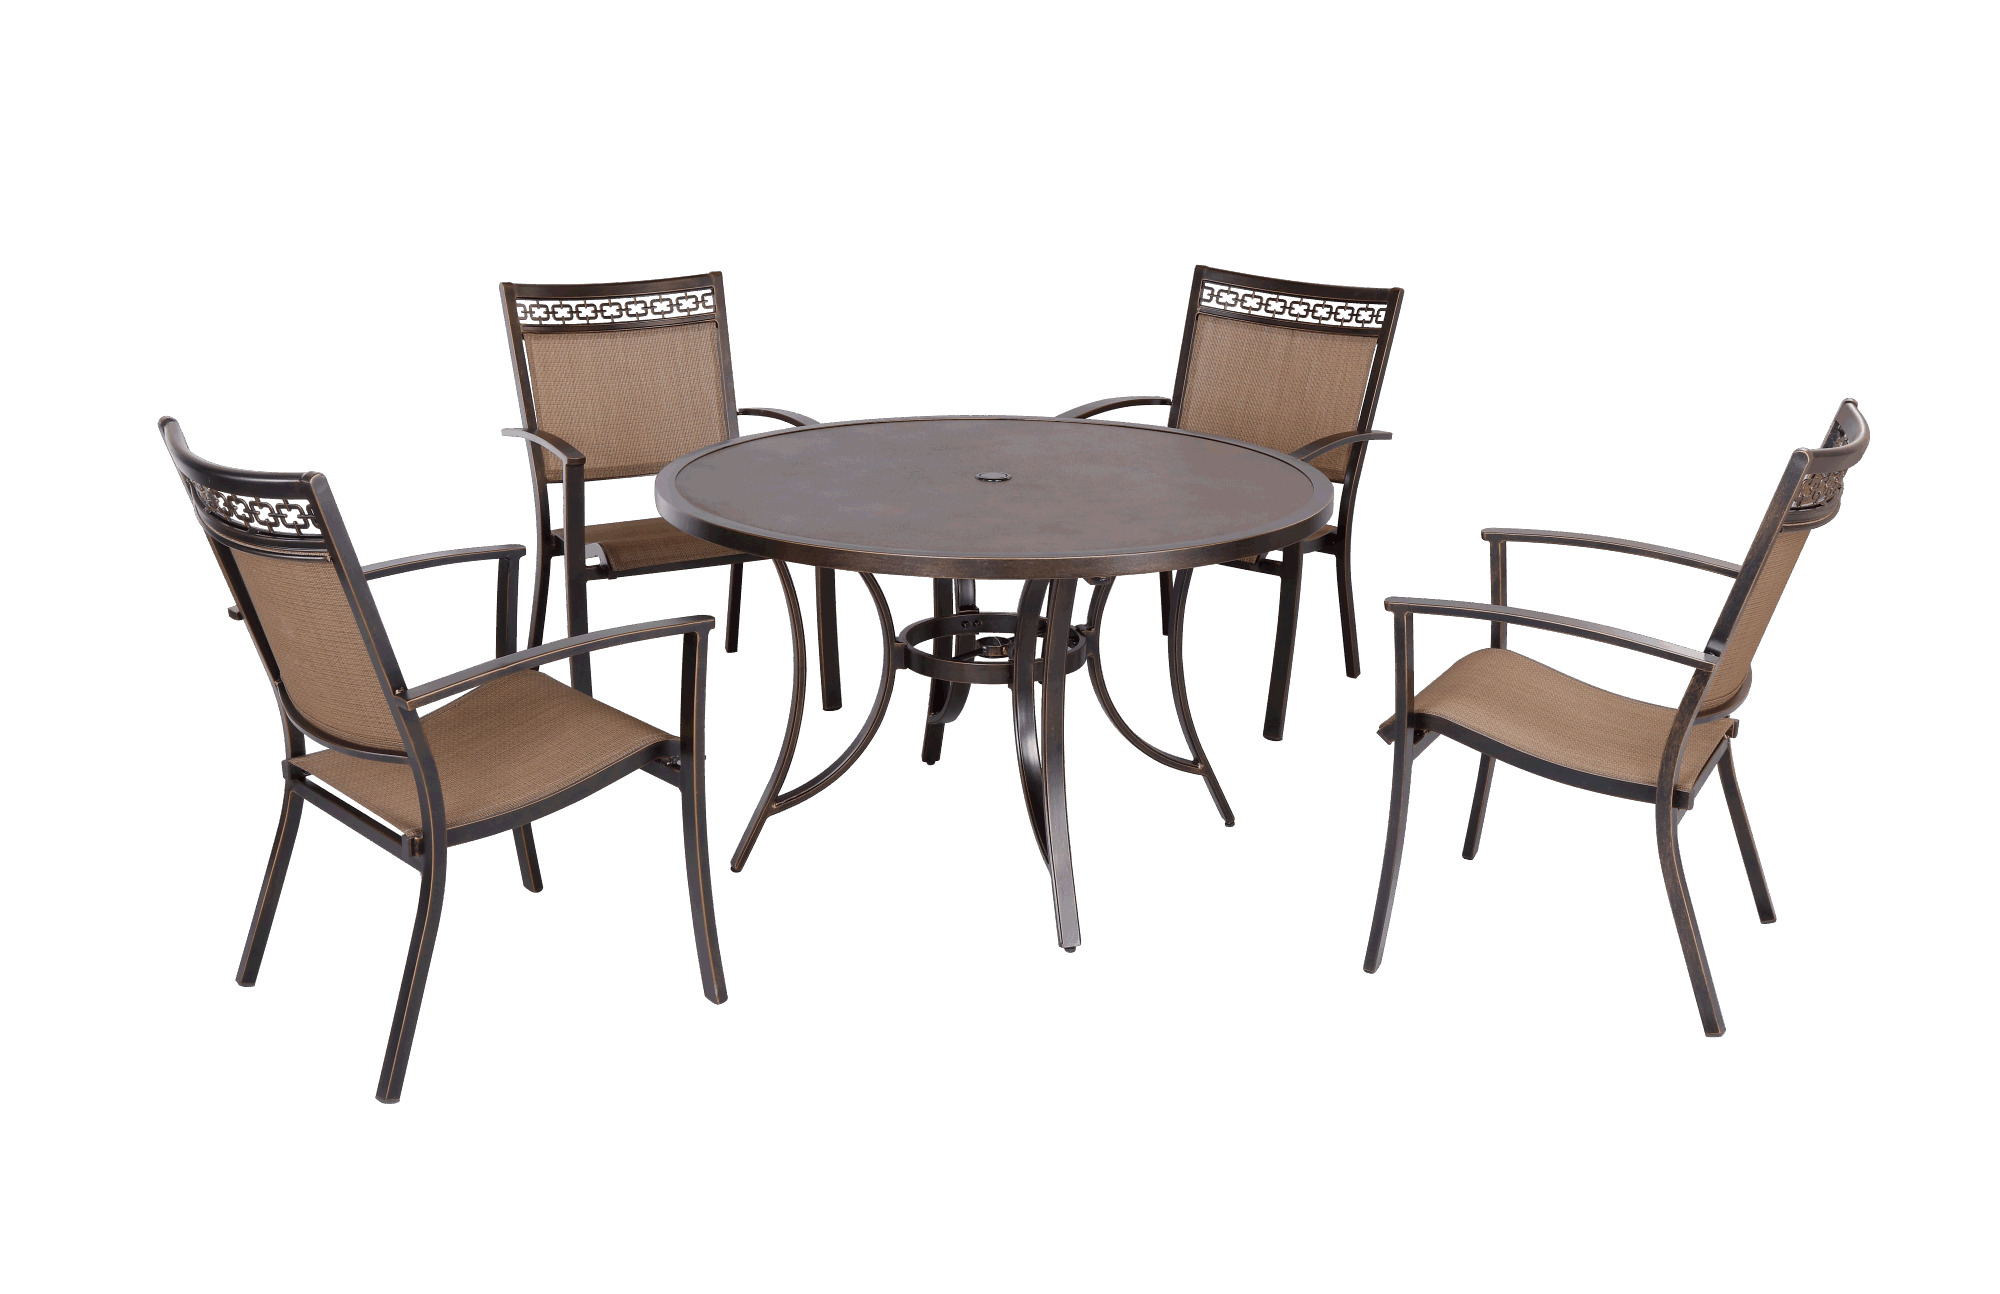 [PICK UP ONLY]Outdoor 5 Piece Dining Set Patio Furniture w/ 4pcs Sling Chair & 1pc Tempered Glass Tabletop